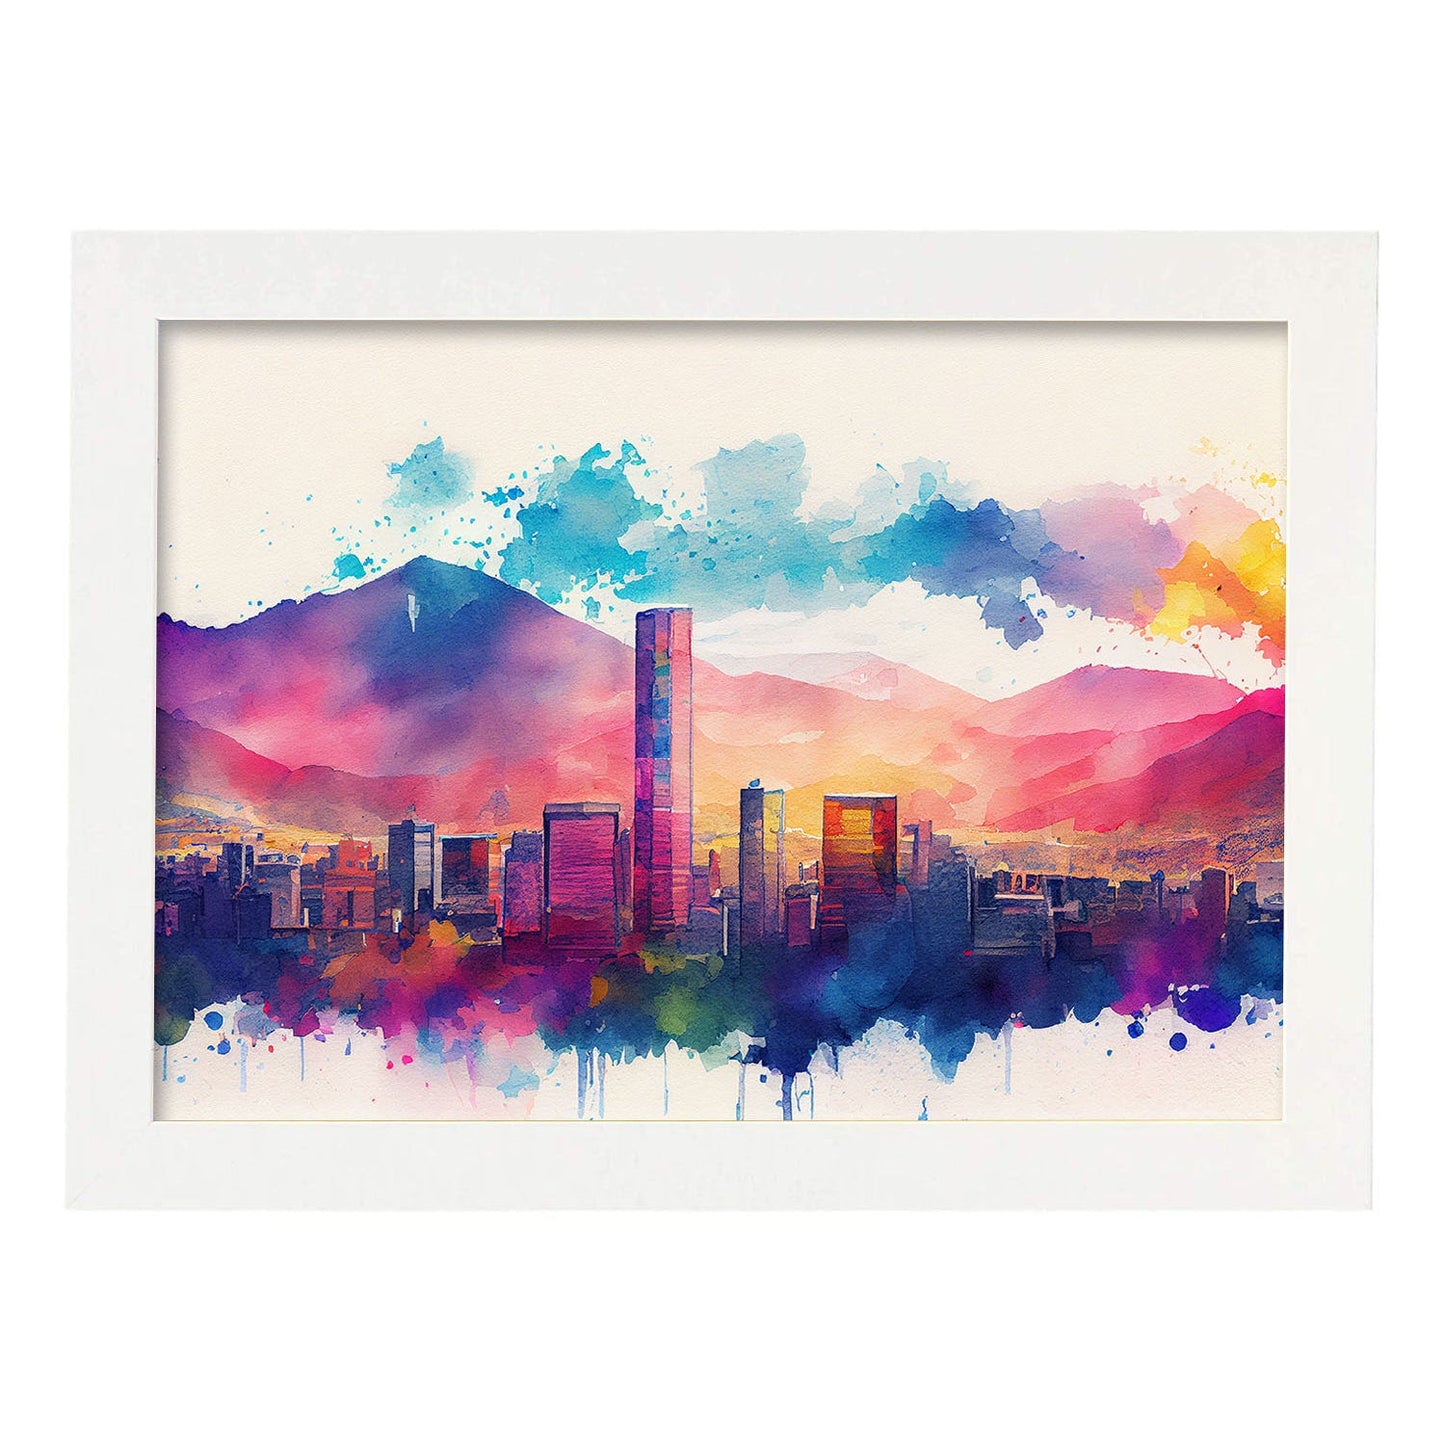 Nacnic watercolor of a skyline of the city of Bogota. Aesthetic Wall Art Prints for Bedroom or Living Room Design.-Artwork-Nacnic-A4-Marco Blanco-Nacnic Estudio SL